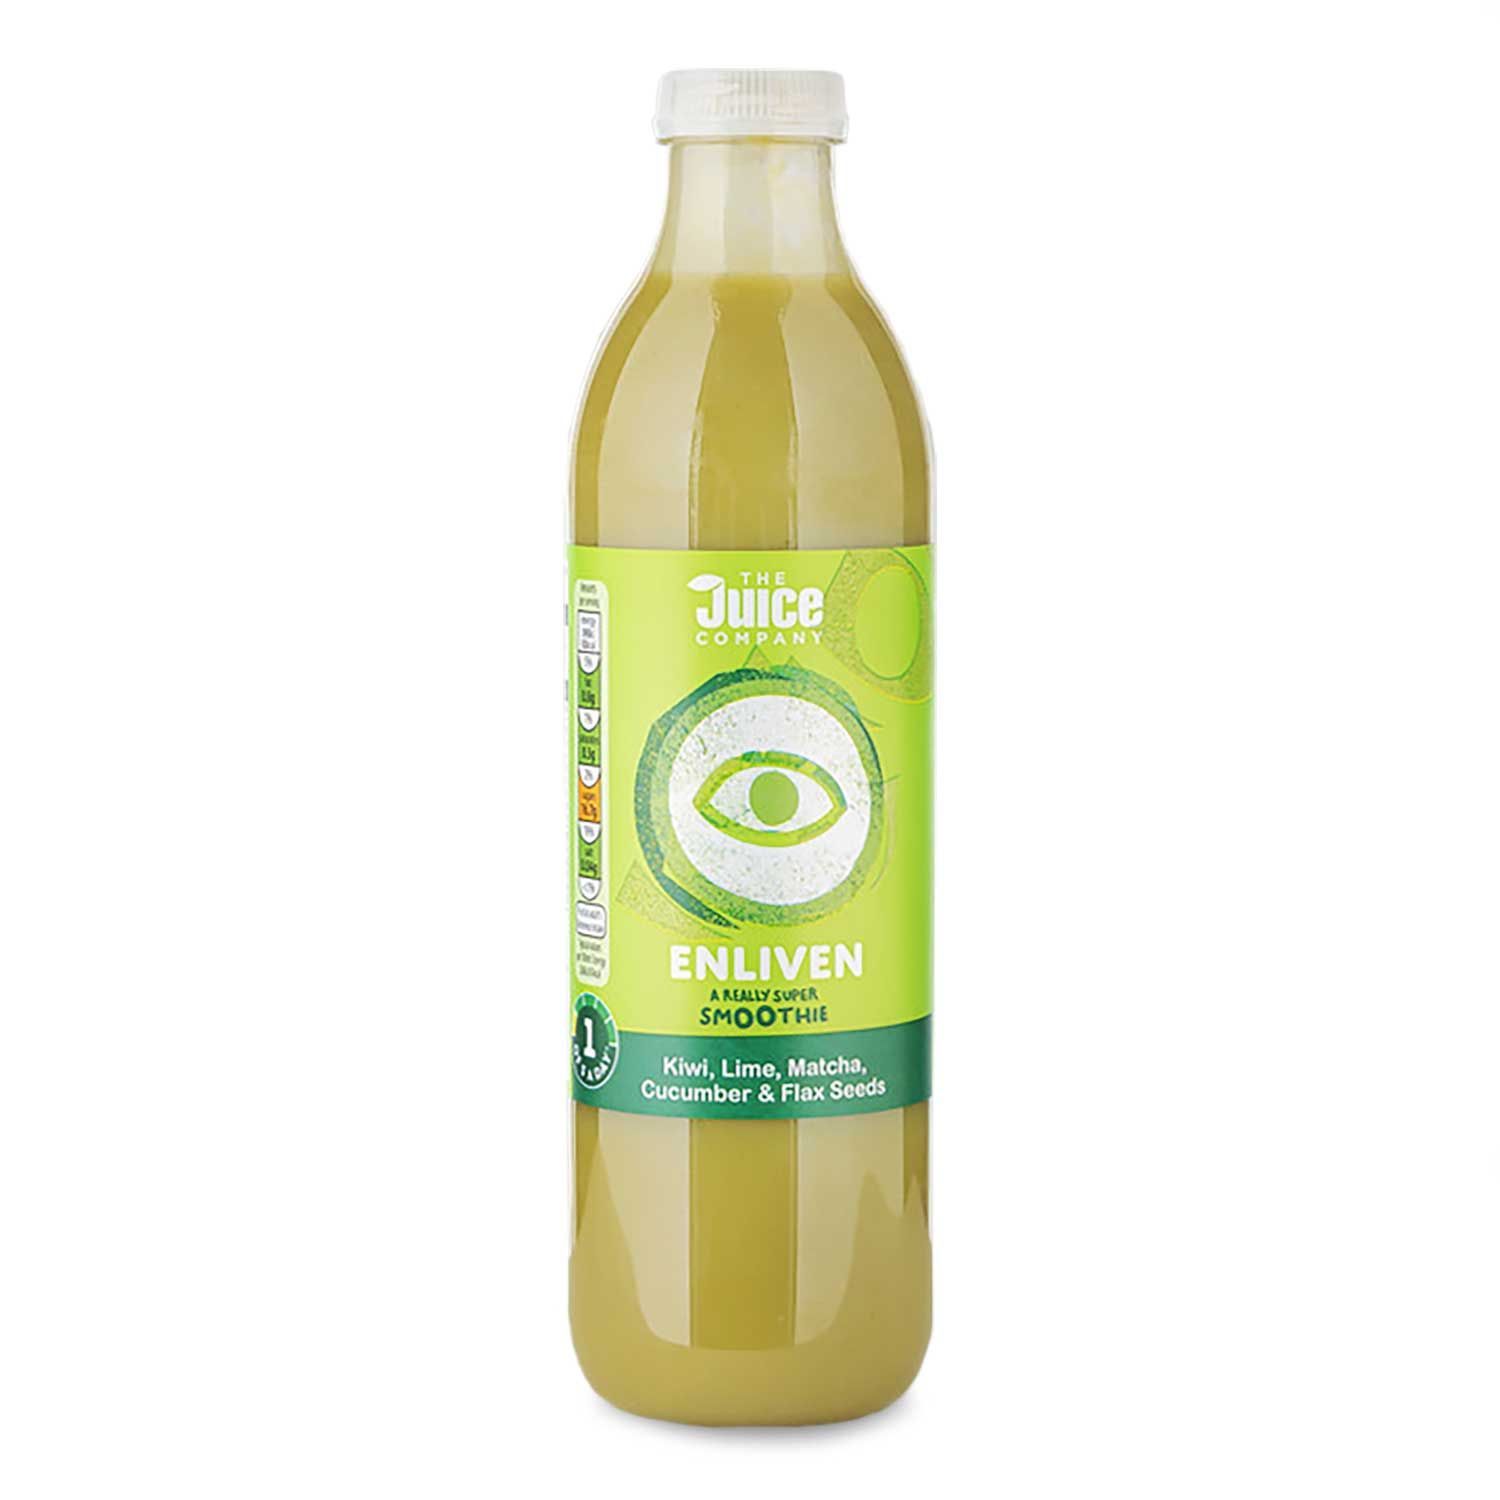 Enliven, Kiwi, Lime, Matcha, Cucumber & Flax Seeds Smoothie 750ml The Juice  Company 